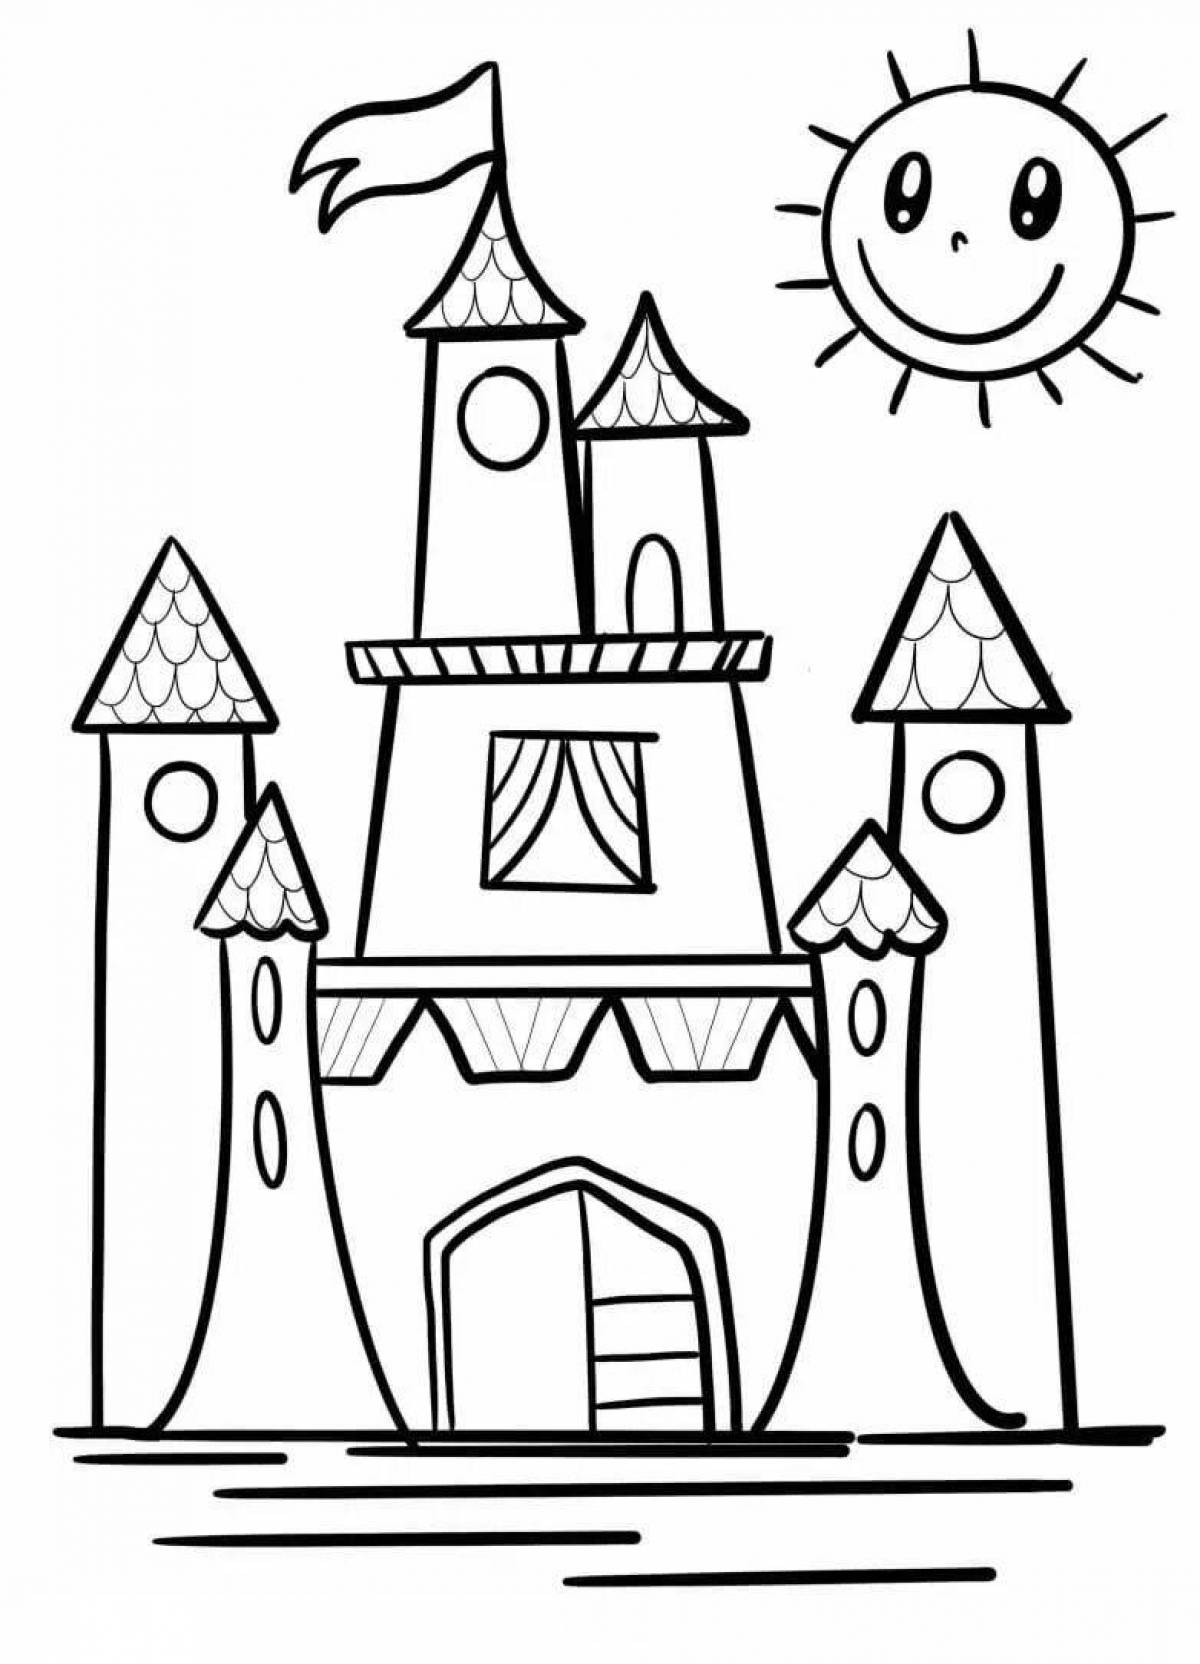 Fairytale castle coloring book for kids